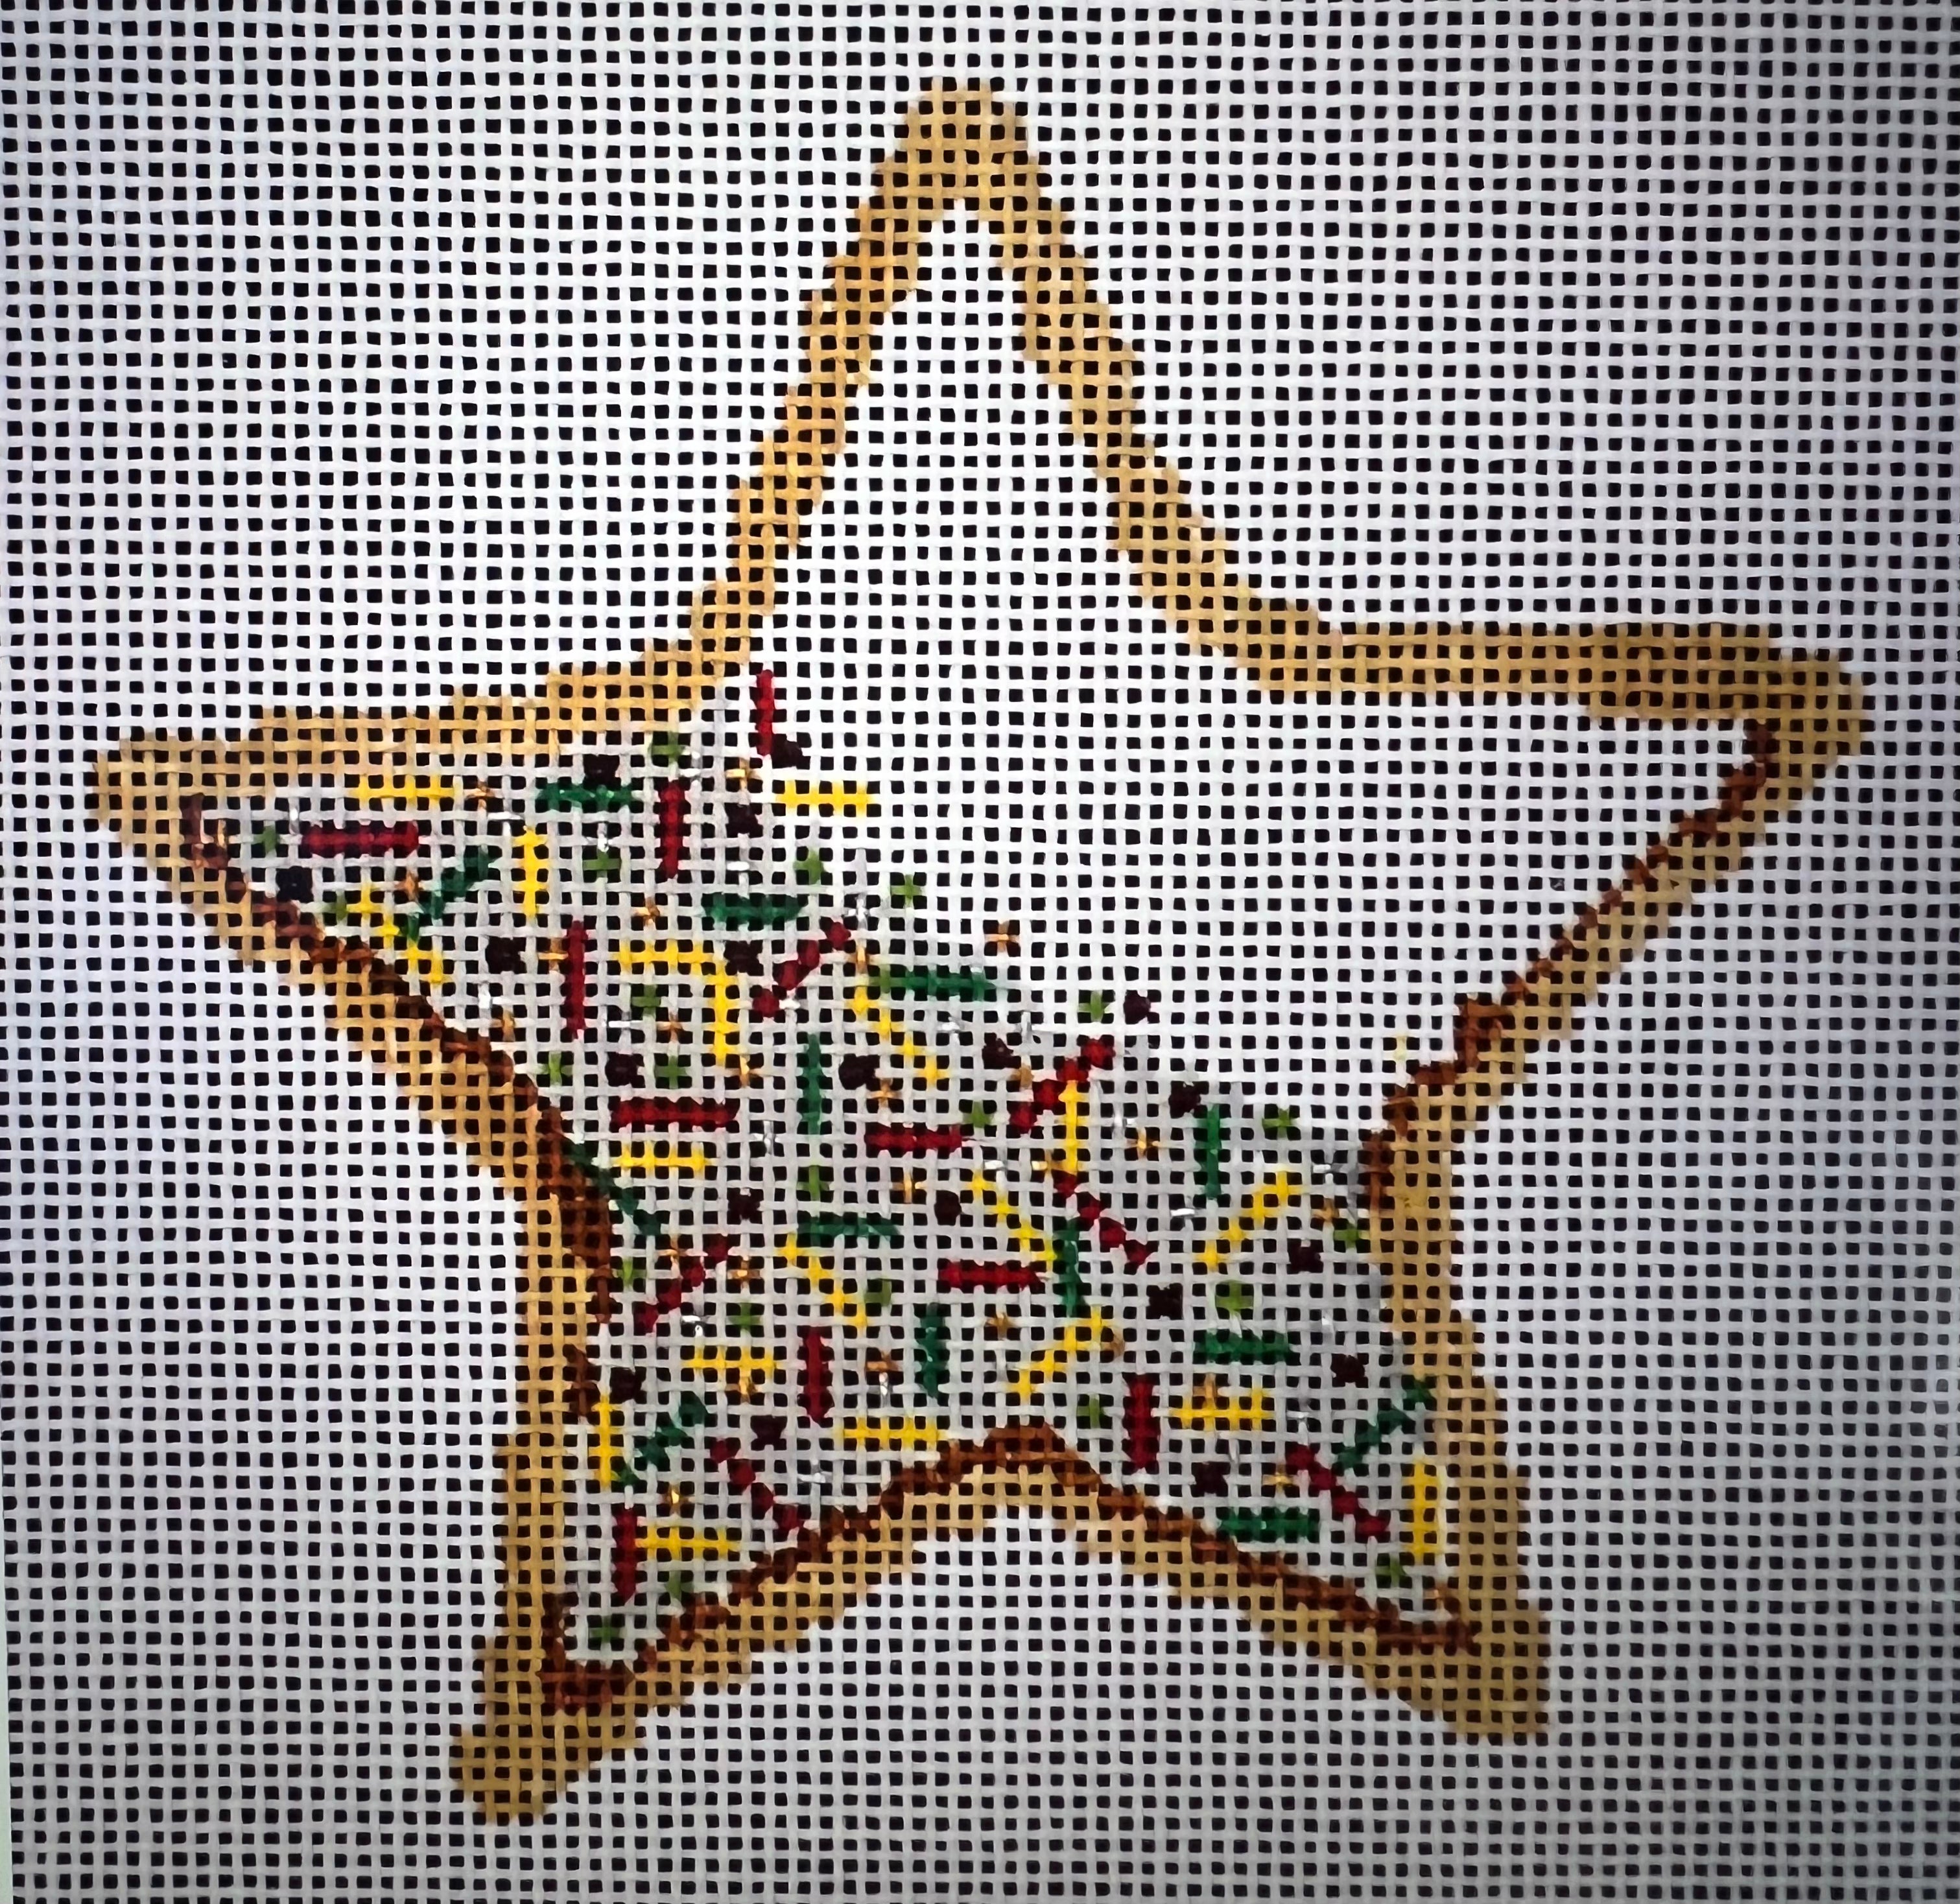 Star Cookie Kit by Laura Love Designs